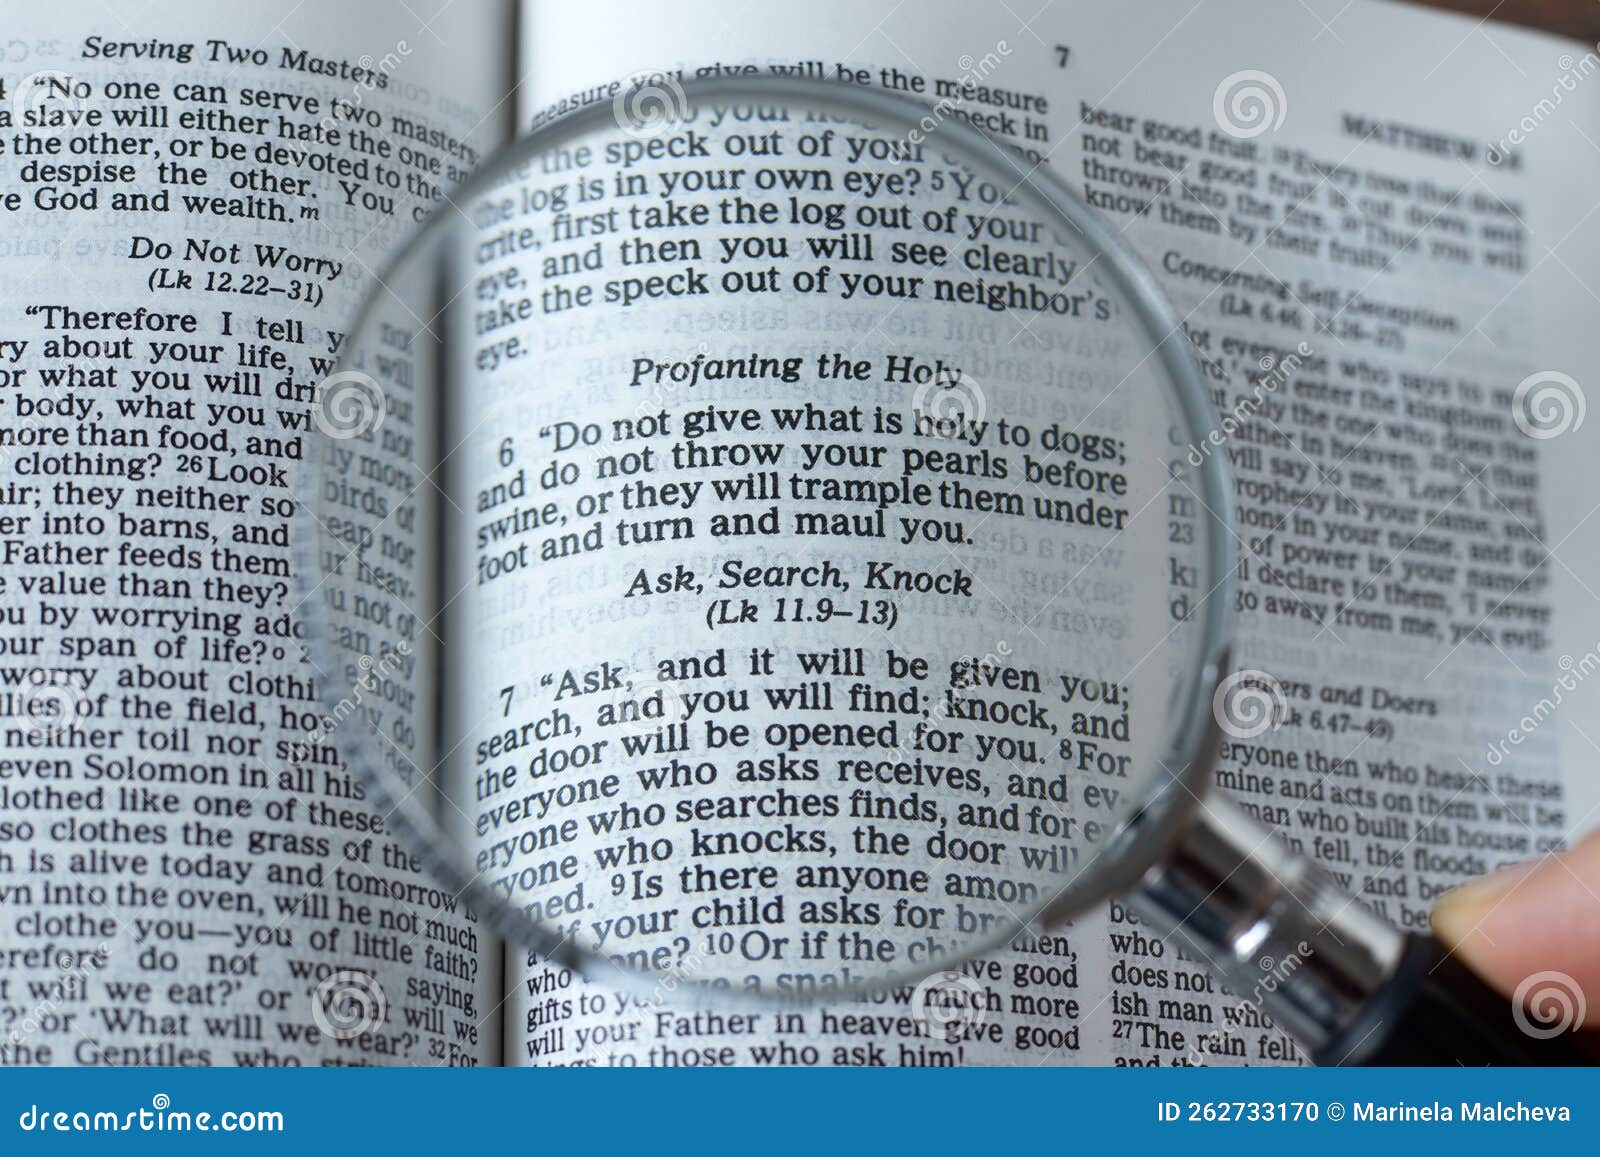 magnifying glass over open holy bible book, close-up, ask, search, knock verse, matthew 7:7 scripture text